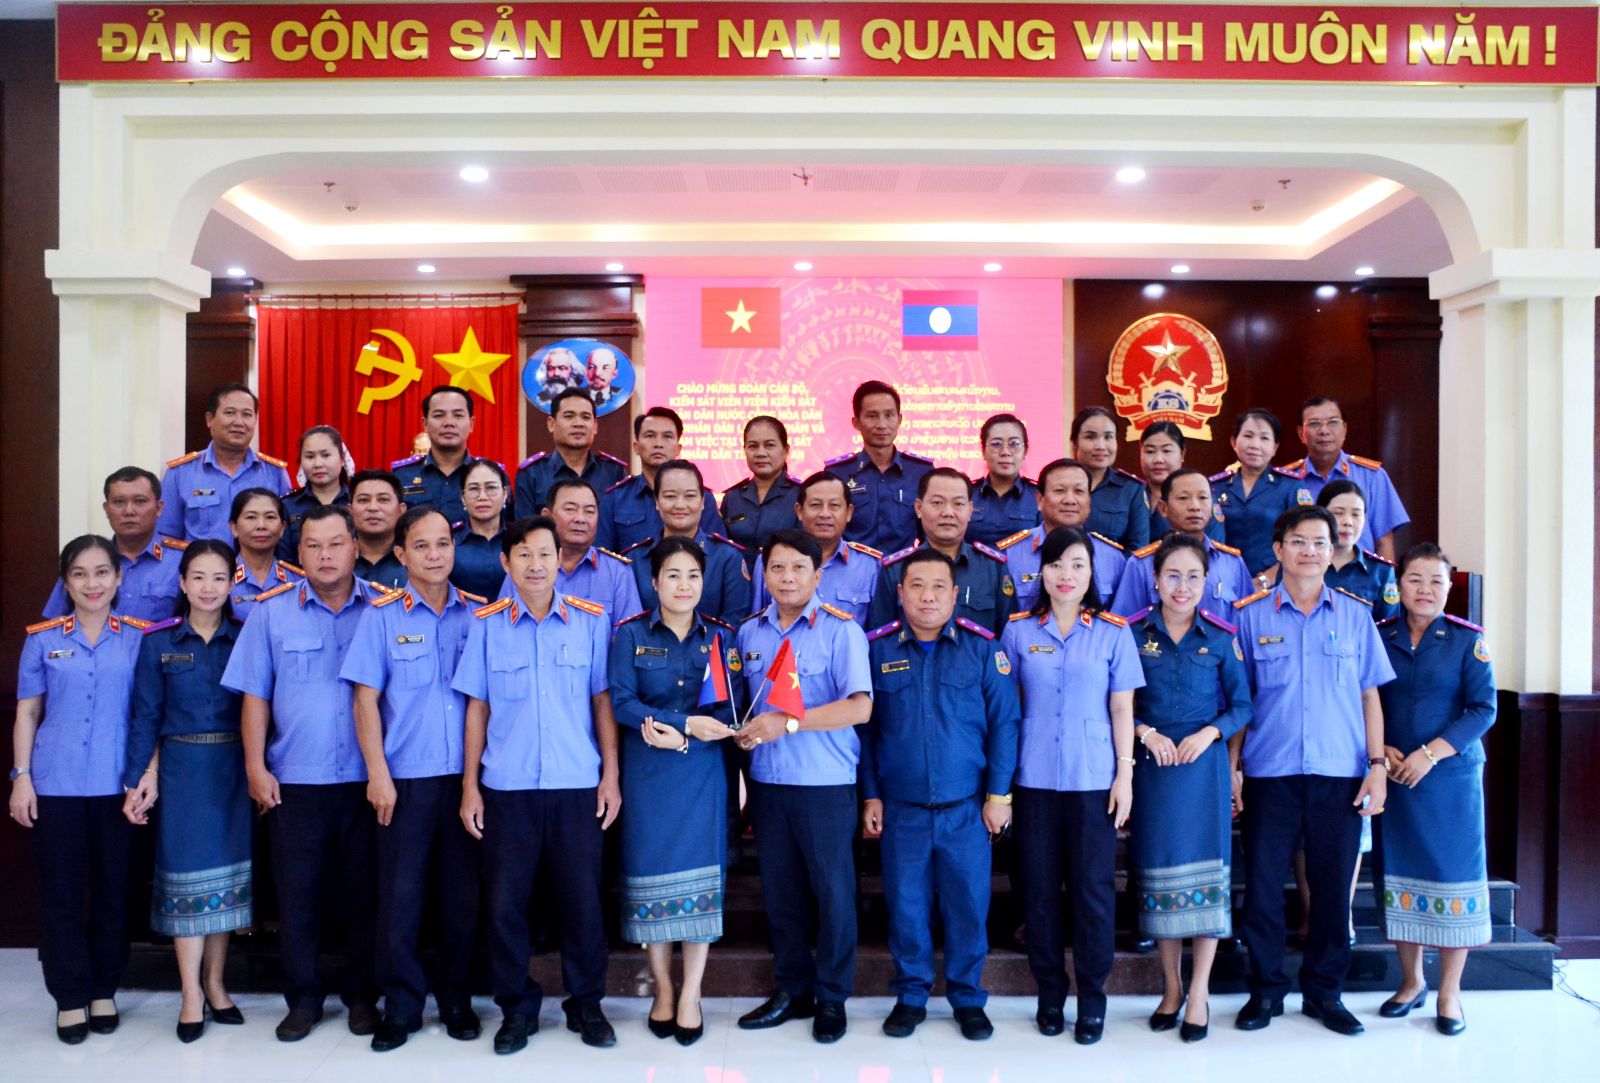 The delegation of the People's Procuracy of Lao PDR takes souvenir photos with the Provincial People's Procuracy